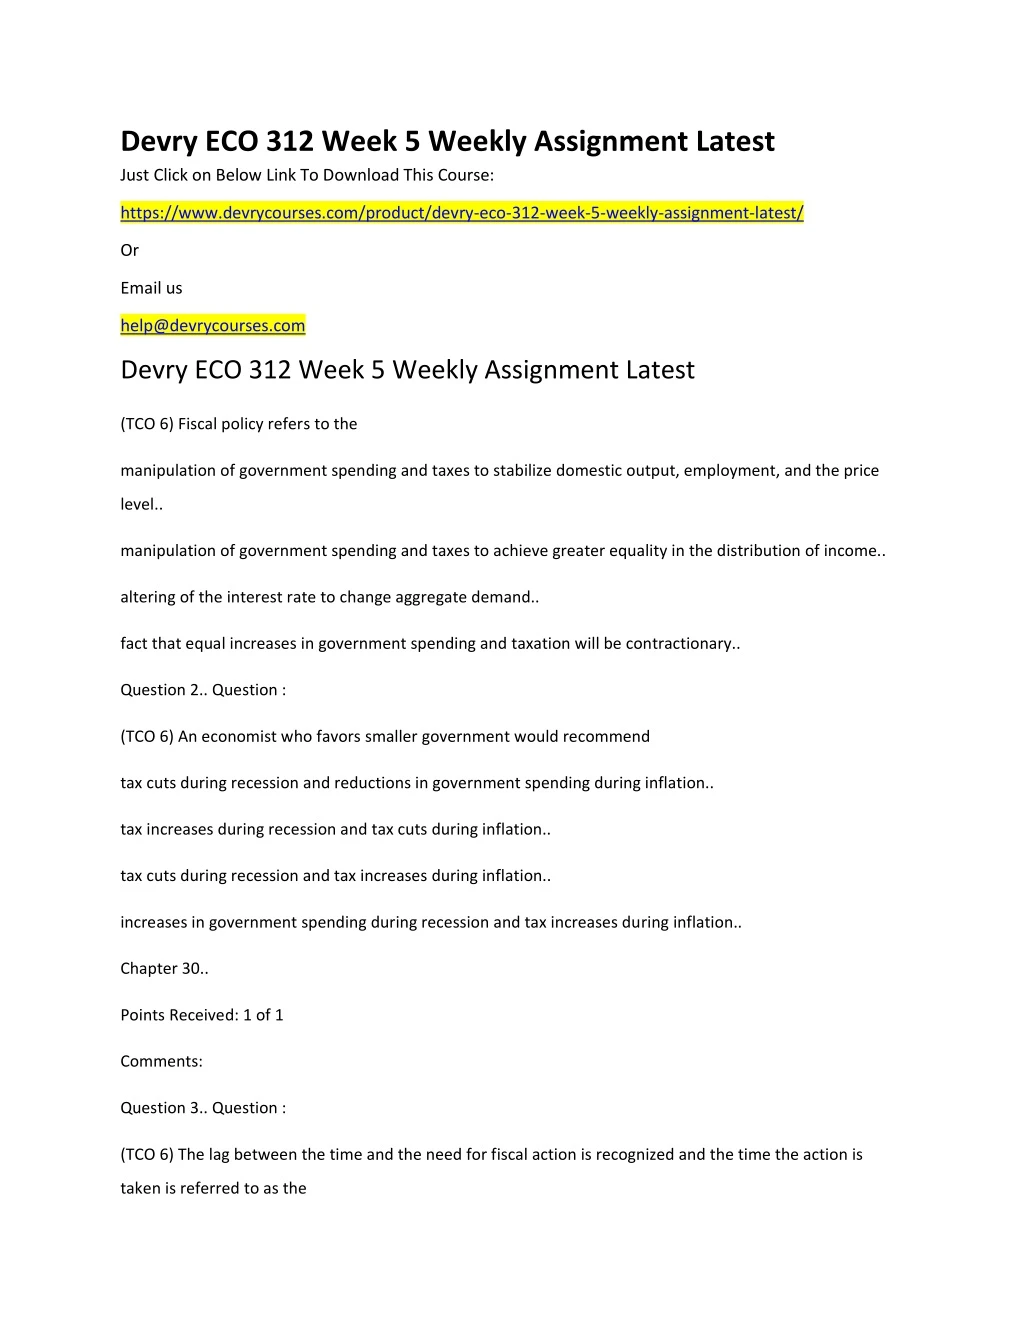 devry eco 312 week 5 weekly assignment latest